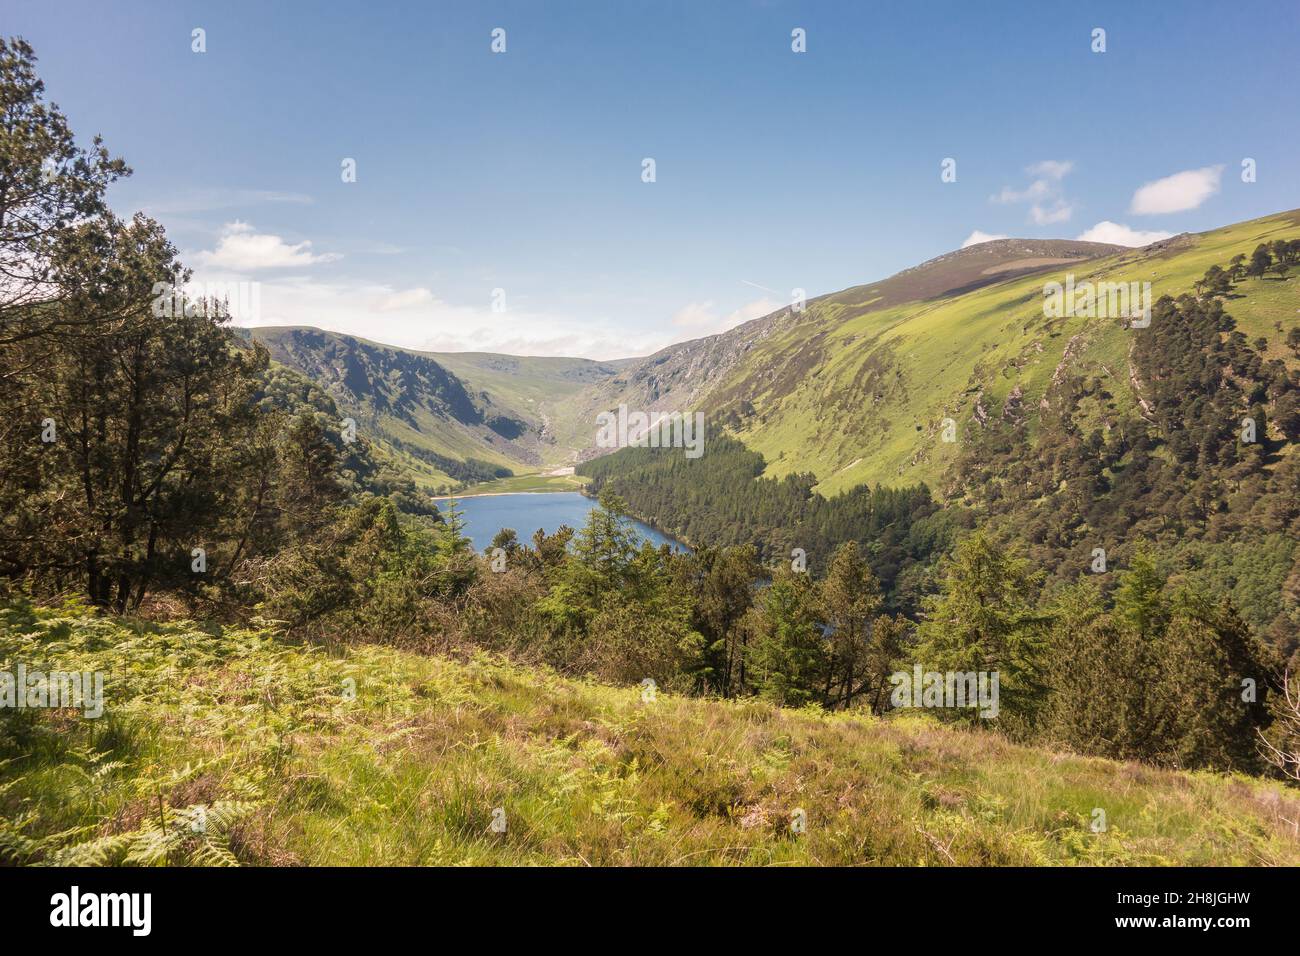 View looking down on the upper lake and woodland at Glendalough National Park, County Wicklow, Ireland. Stock Photo